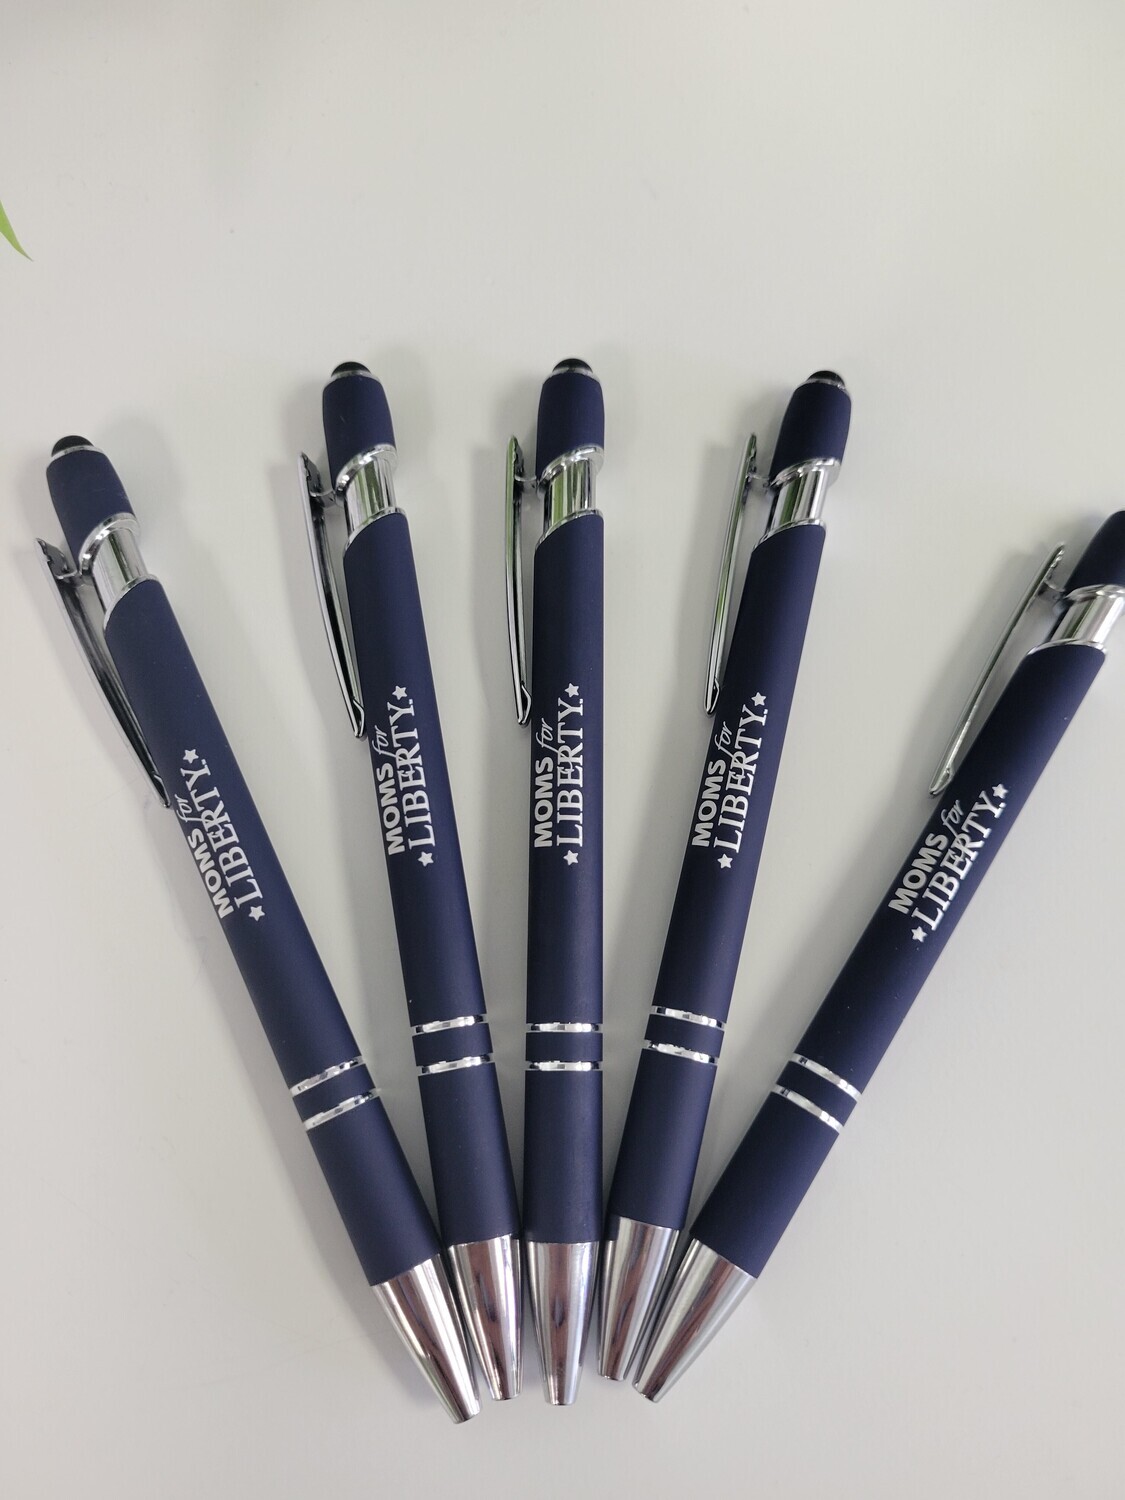 Moms for Liberty pen